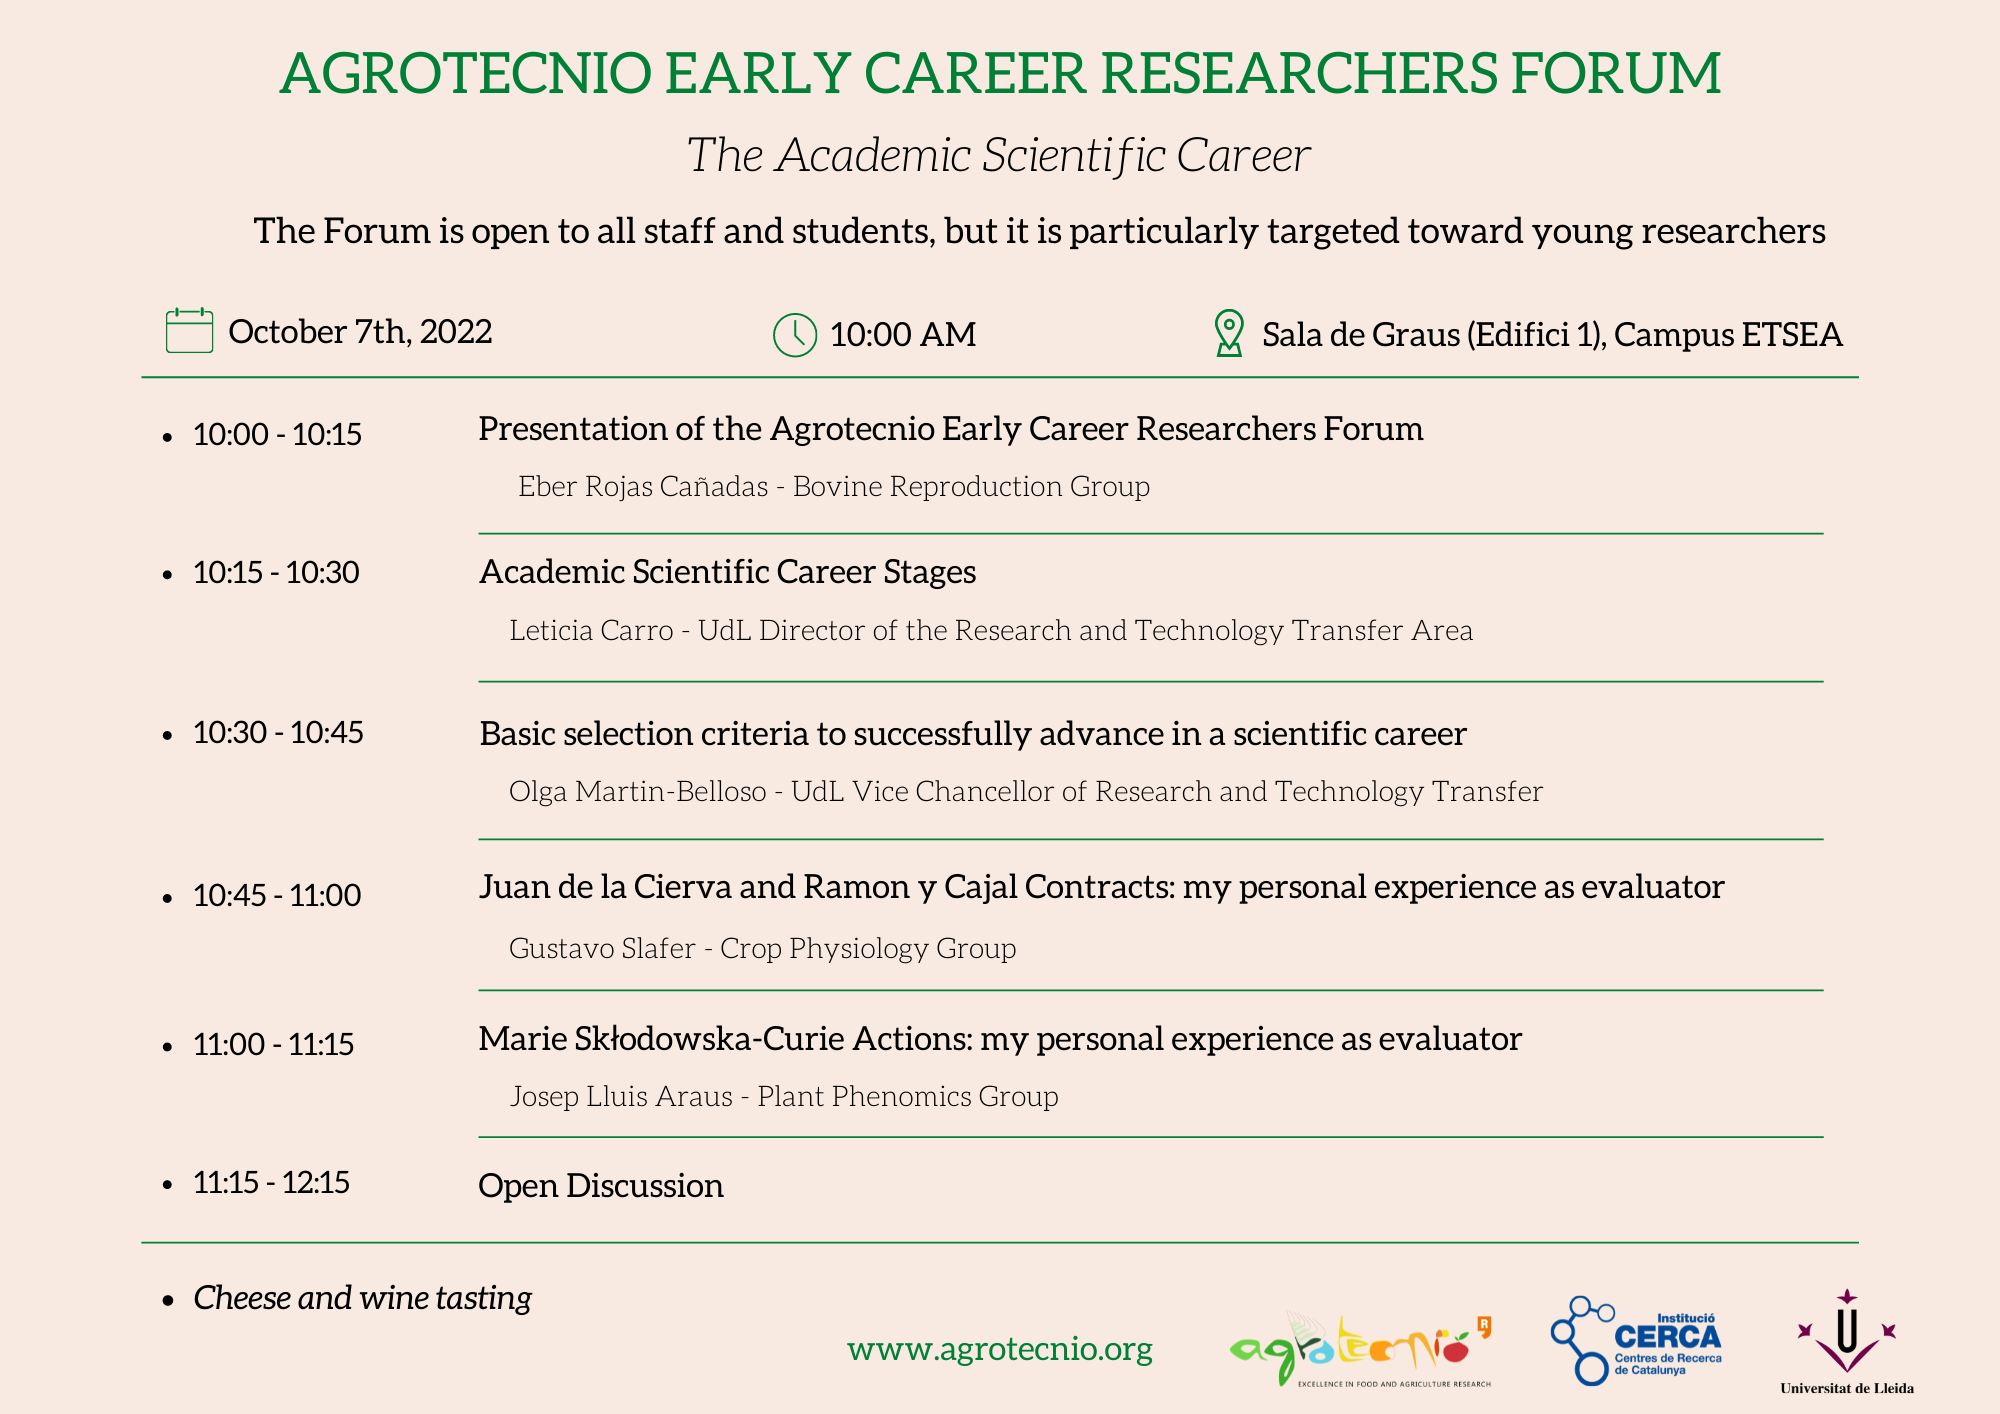 Agrotecnio-Early-career-researchers-forum-Program